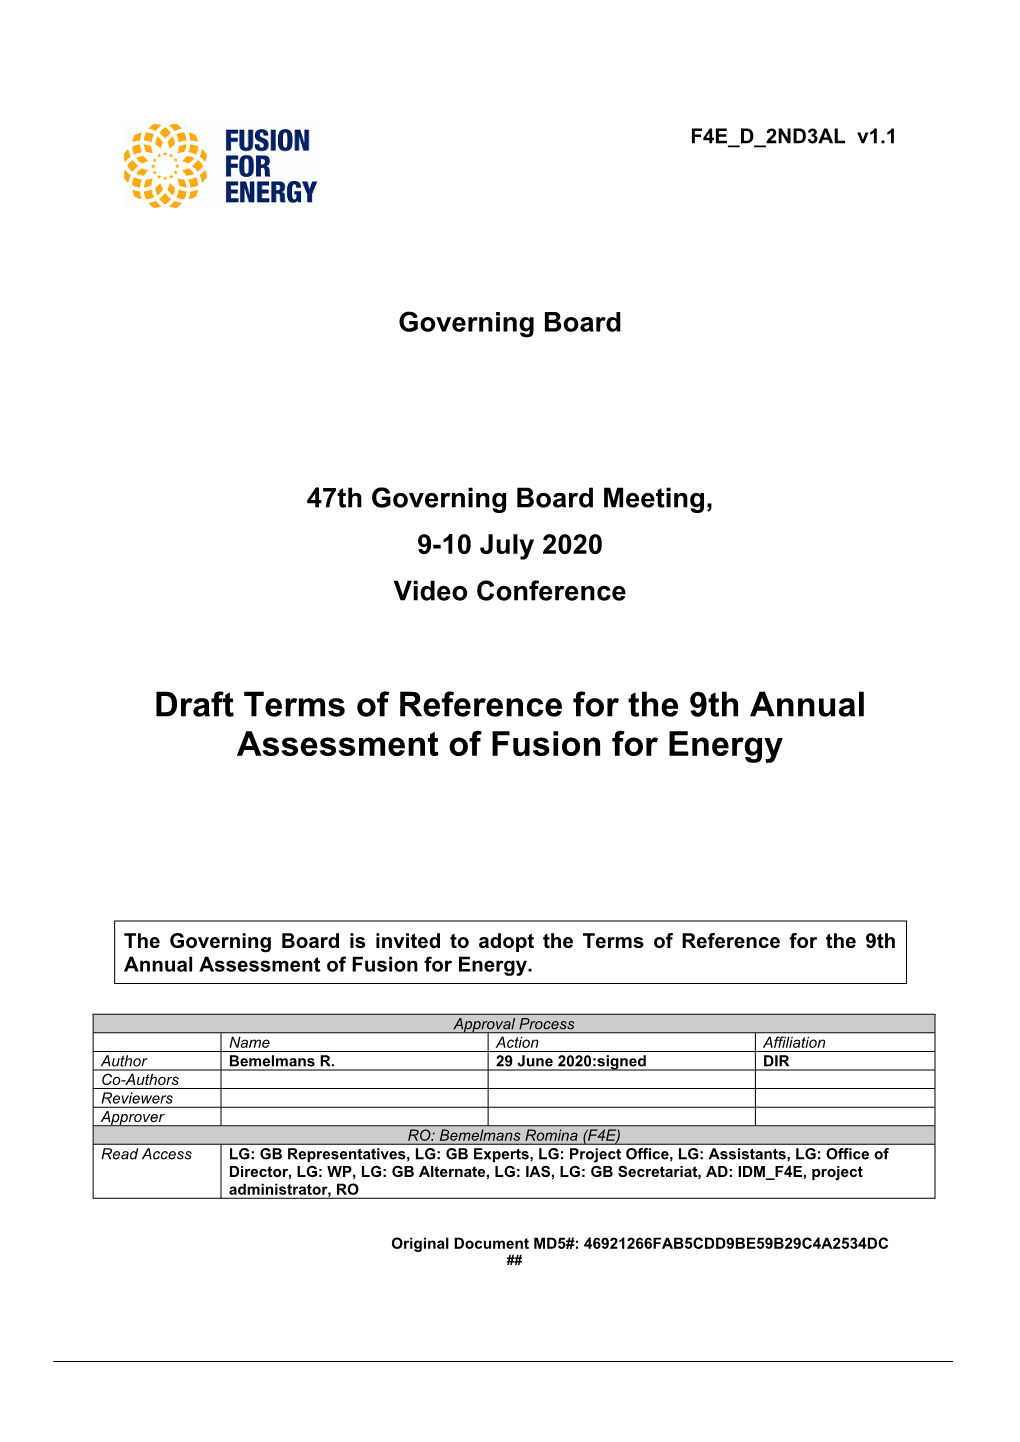 Draft Terms of Reference for the 9Th Annual Assessment of Fusion for Energy